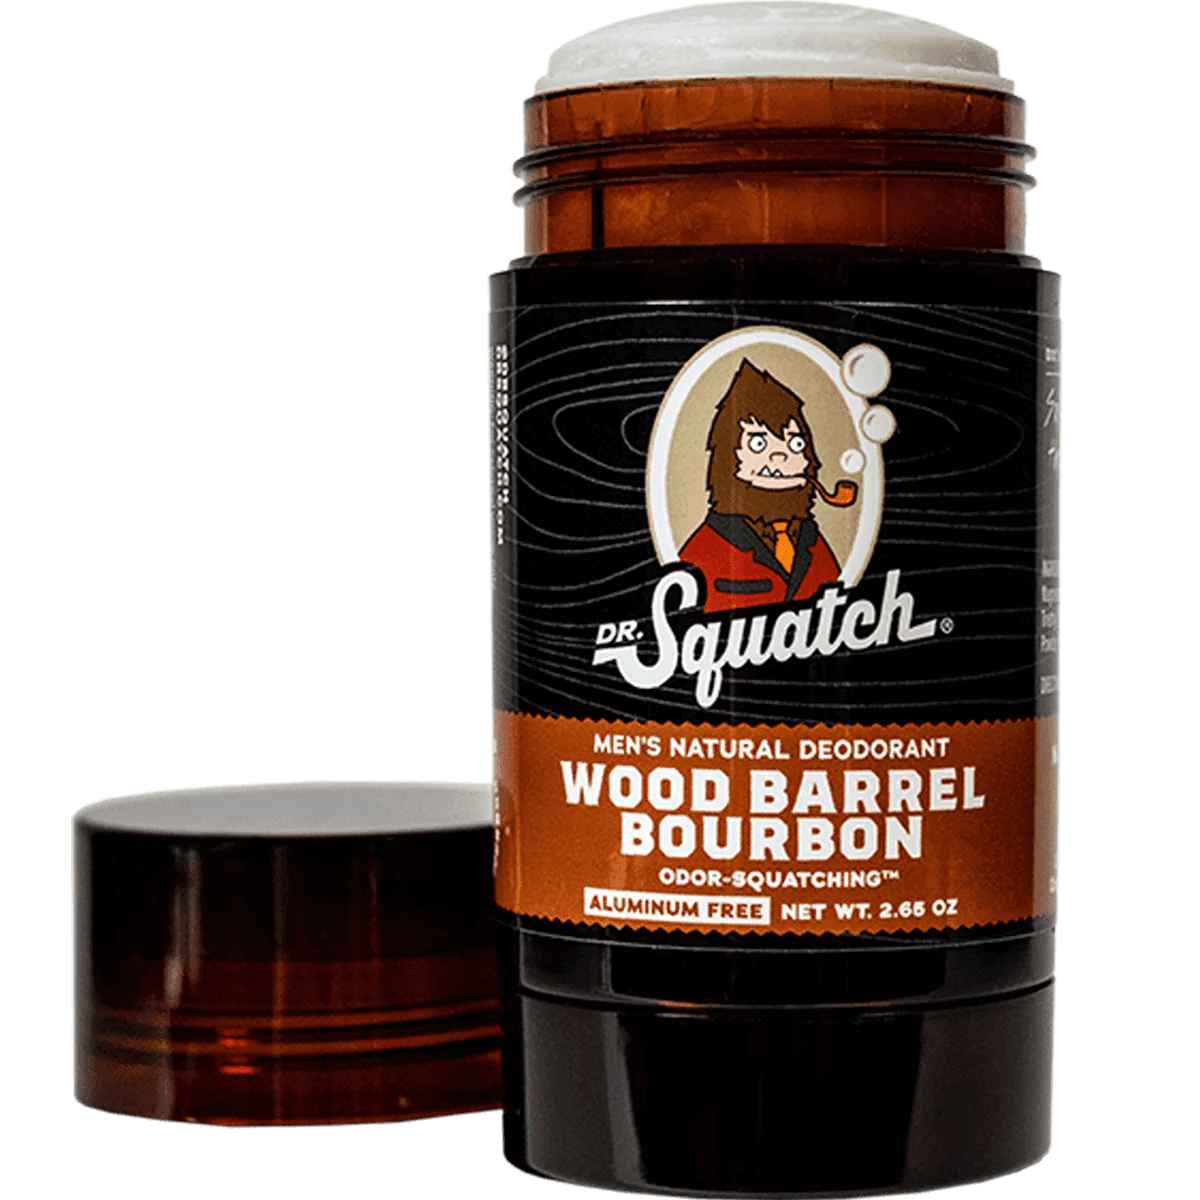 Dr. Squatch - Introducing our newest scent 💦 Fresh Falls 💦